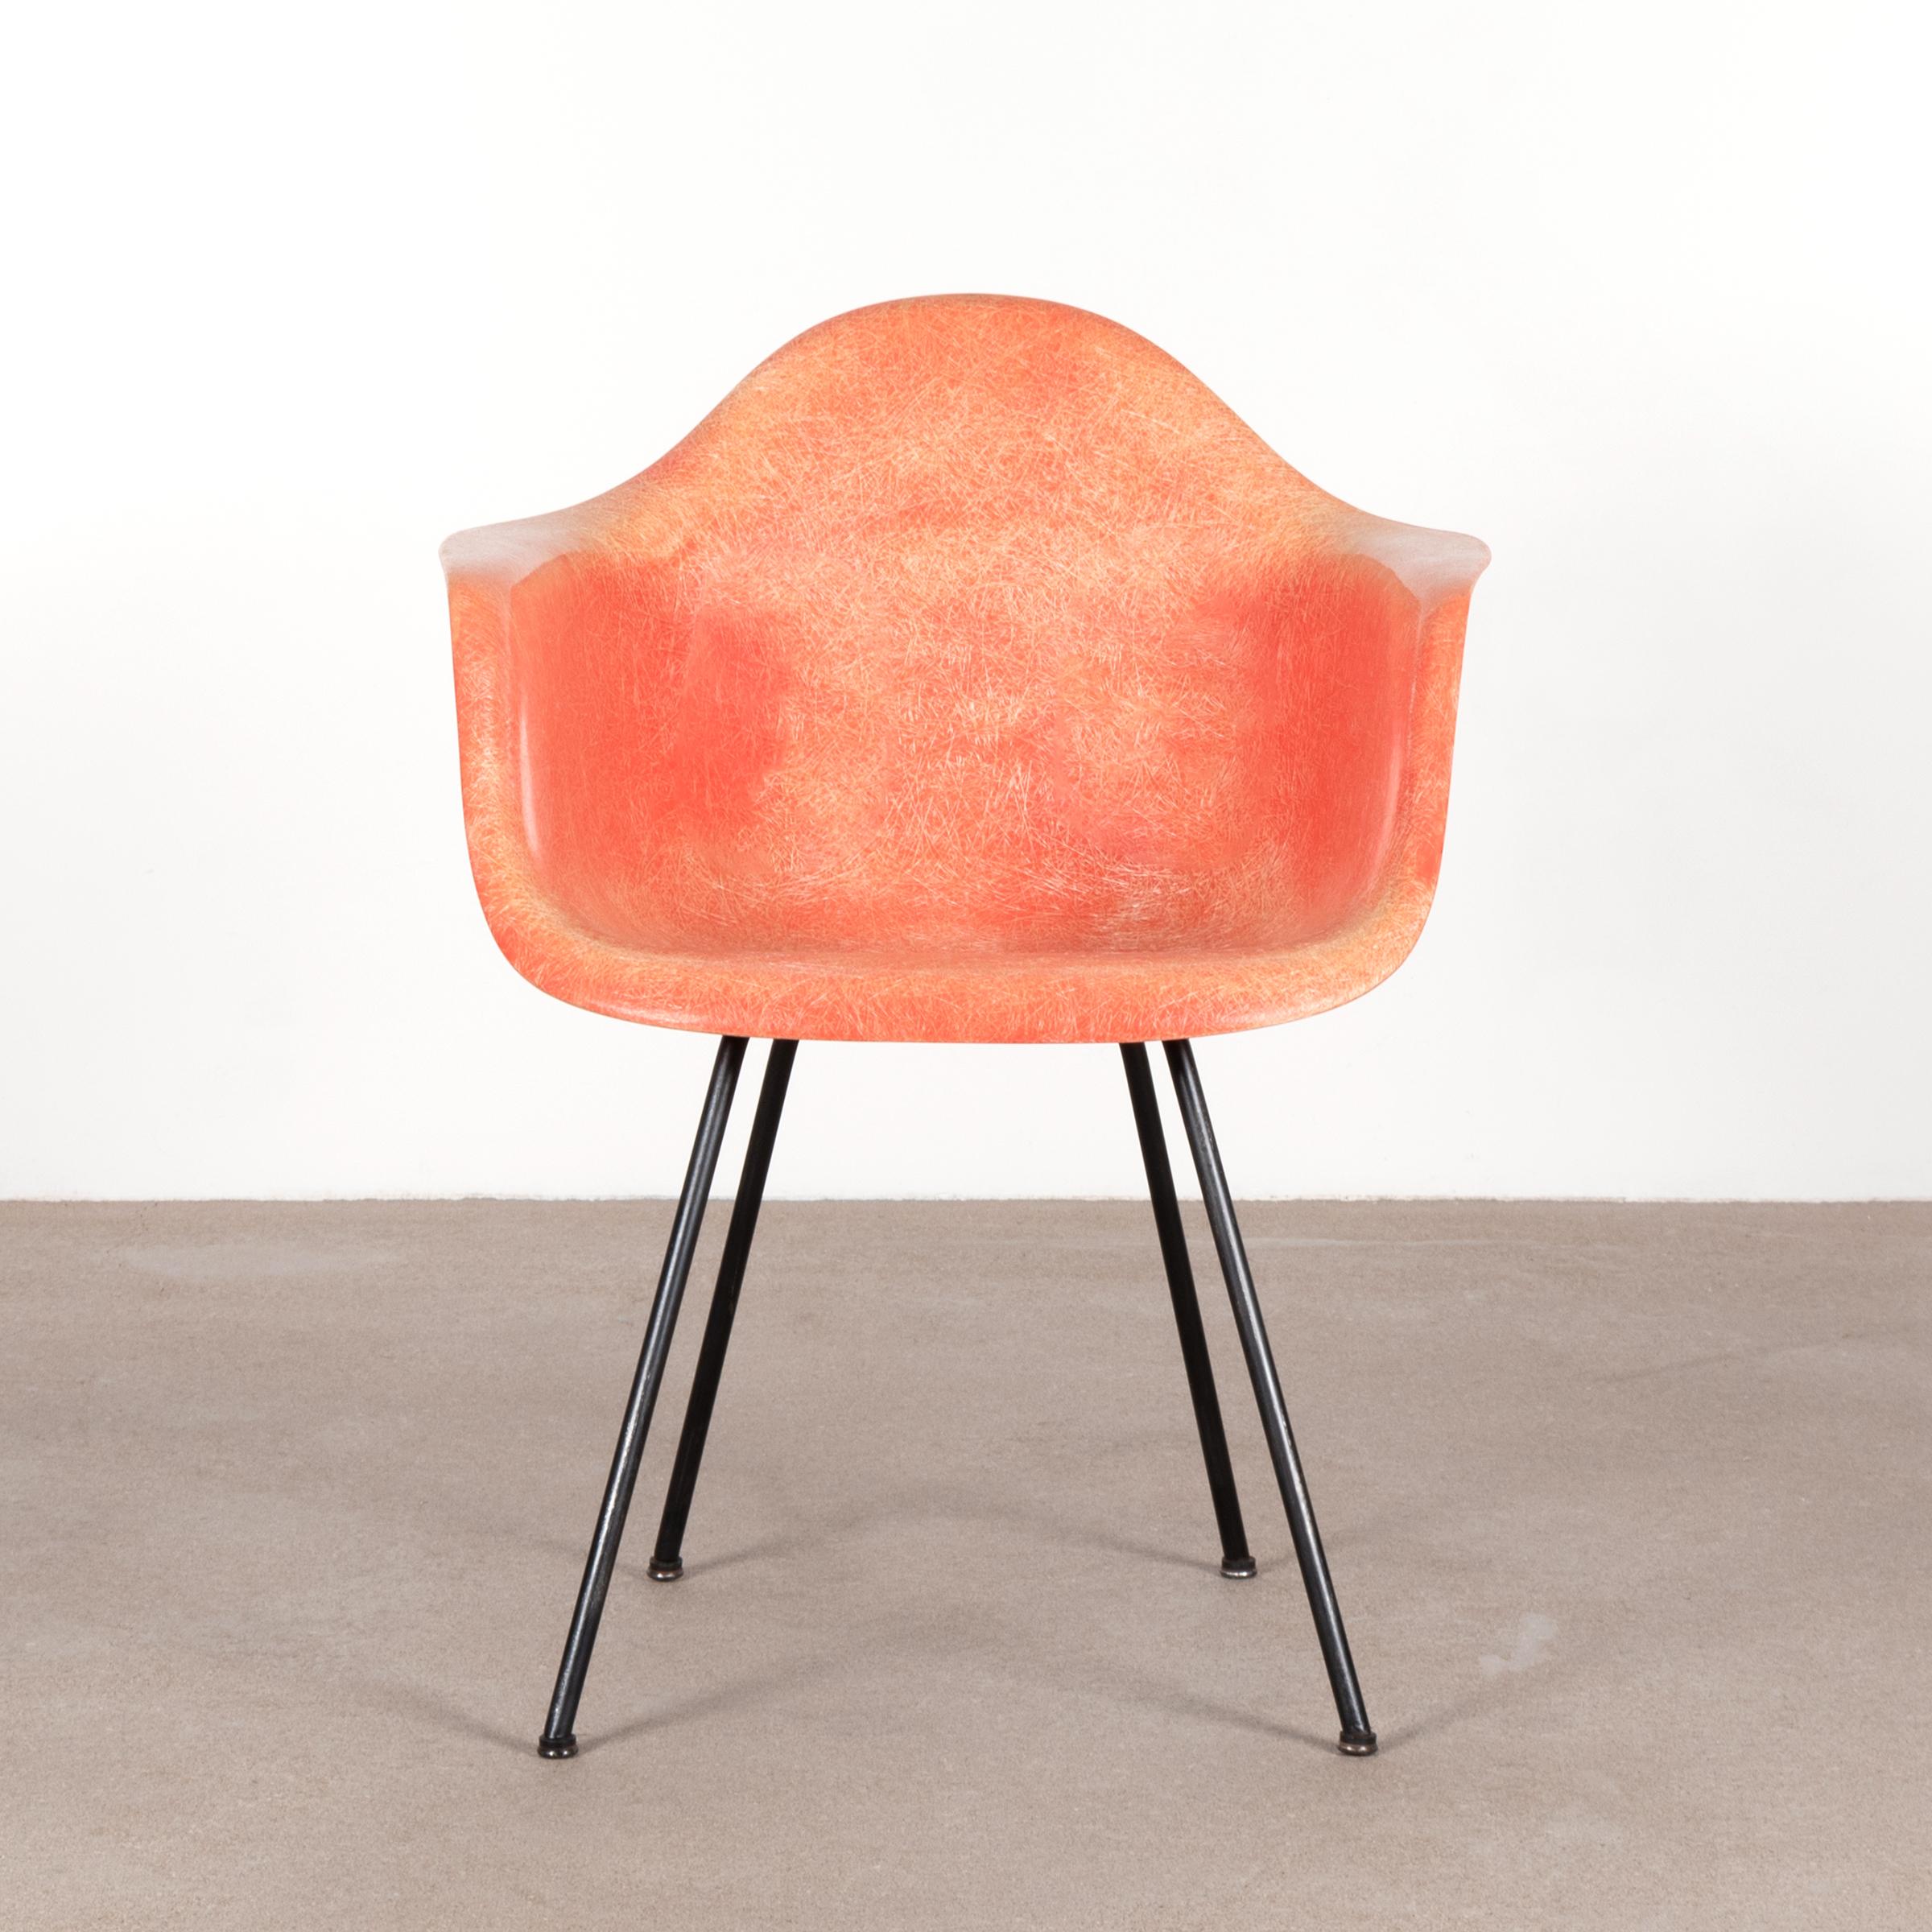 Iconic Dax chair in salmon color. Chair is in good condition with only light traces of use. First generation Zenith plastics production with rope. Signed with 'checkerboard label'.